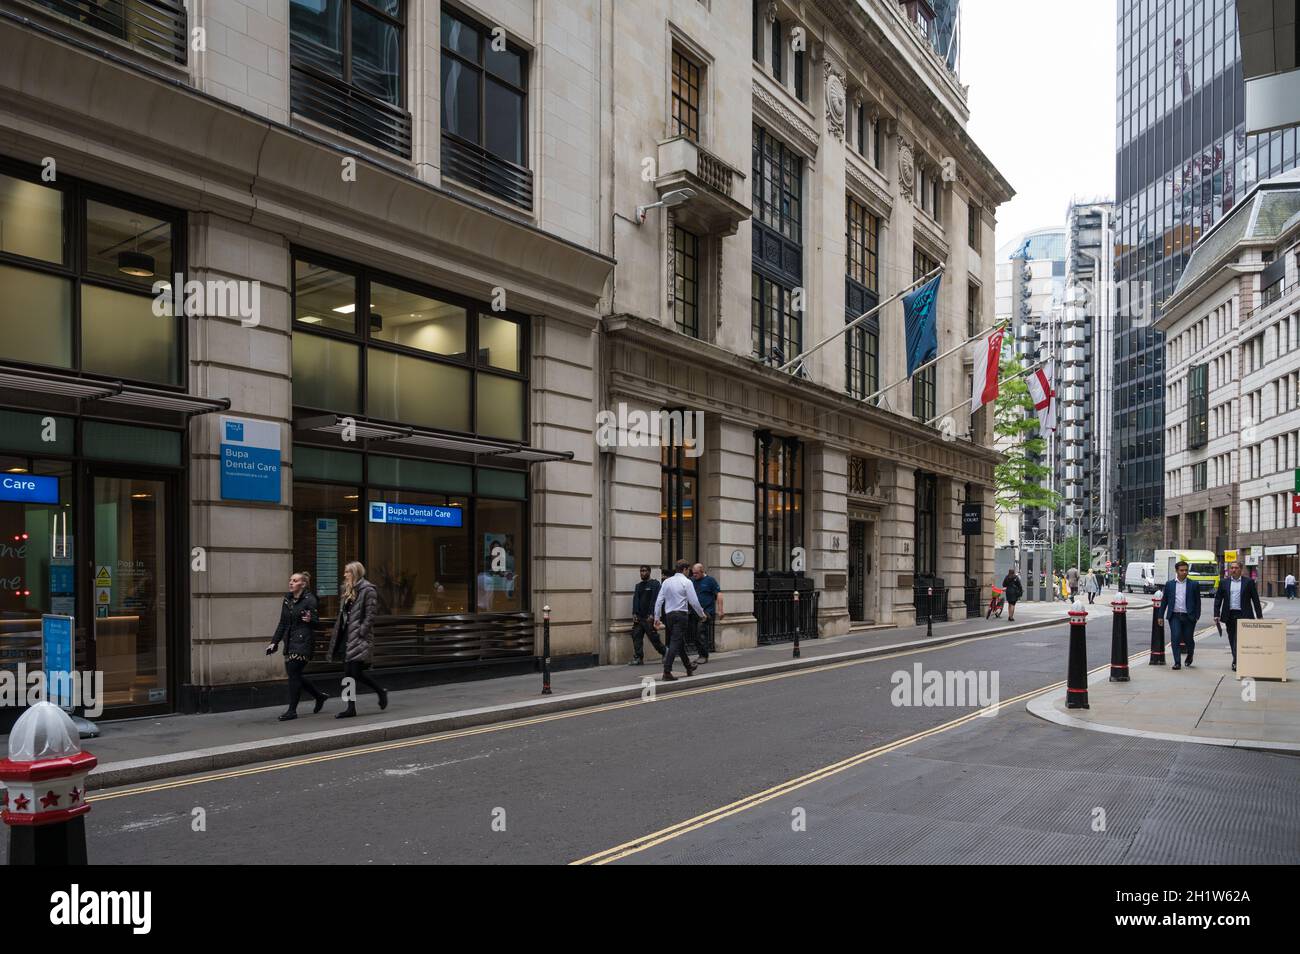 View along St. Mary Axe. Flags mounted on the facade of the original Baltic Exchange building. City of London, England, UK Stock Photo